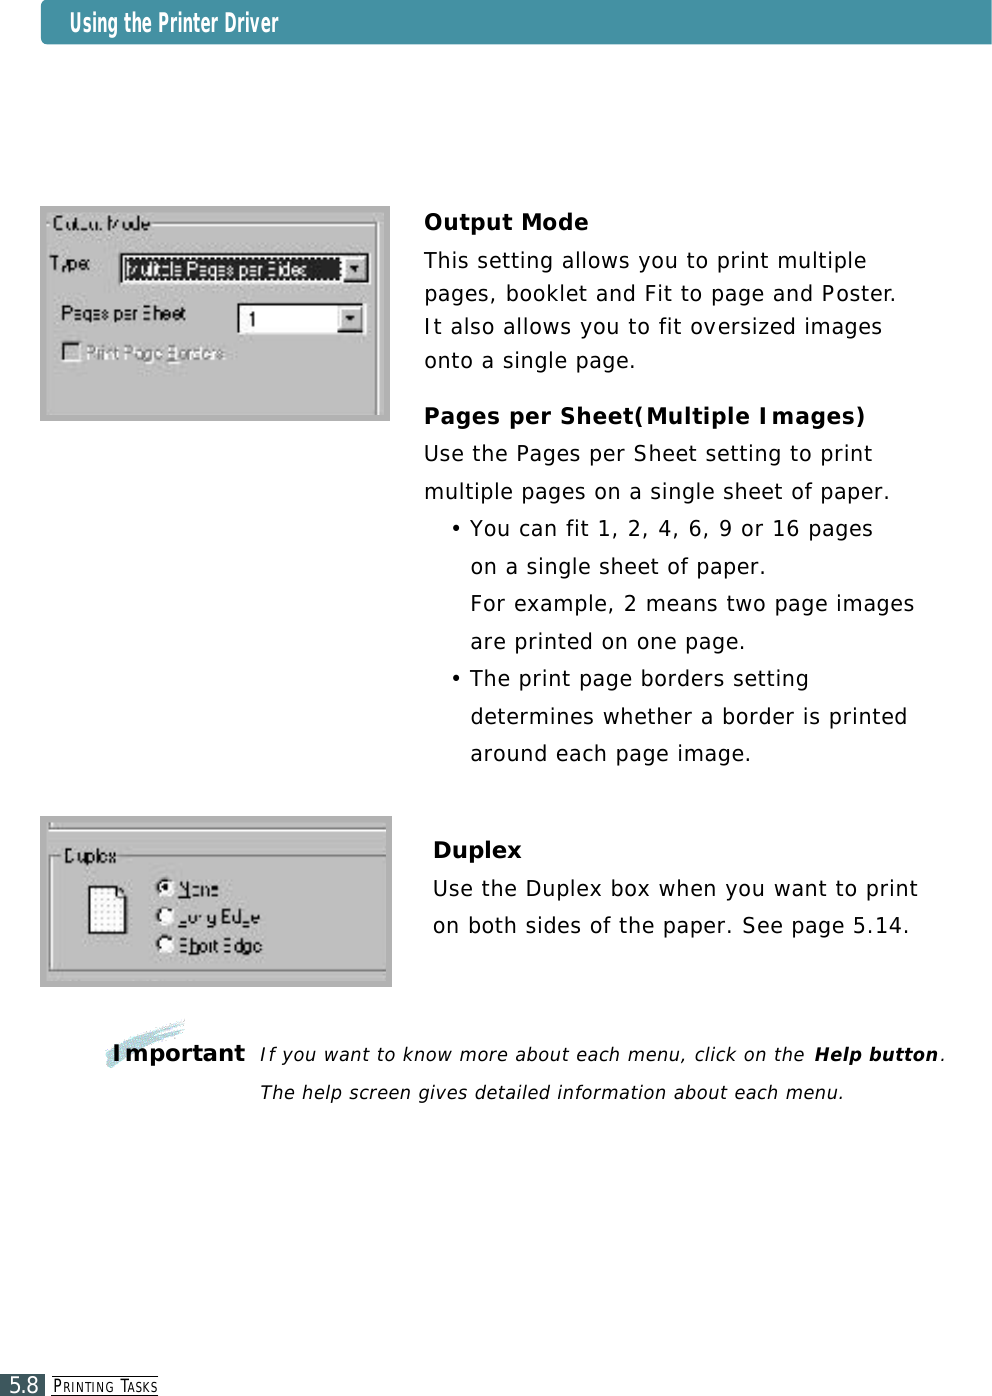 PR I N T I N G TA S K S5.8Output ModeThis setting allows you to print multiplepages, booklet and Fit to page and Po s t e r. It also allows you to fit ove r s i zed imagesonto a single page.Pages per Sheet(Multiple Images)Use the Pages per Sheet setting to printmultiple pages on a single sheet of paper.• You can fit 1, 2, 4, 6, 9 or 16 pages on a single sheet of paper. For example, 2 means two page imagesare printed on one page. • The print page borders settingdetermines whether a border is printedaround each page image.DuplexUse the Duplex box when you want to printon both sides of the paper. See page 5.14.ImportantIf you want to know more about each menu, click on the Help button.The help screen gives detailed information about each menu.Using the Printer Driver